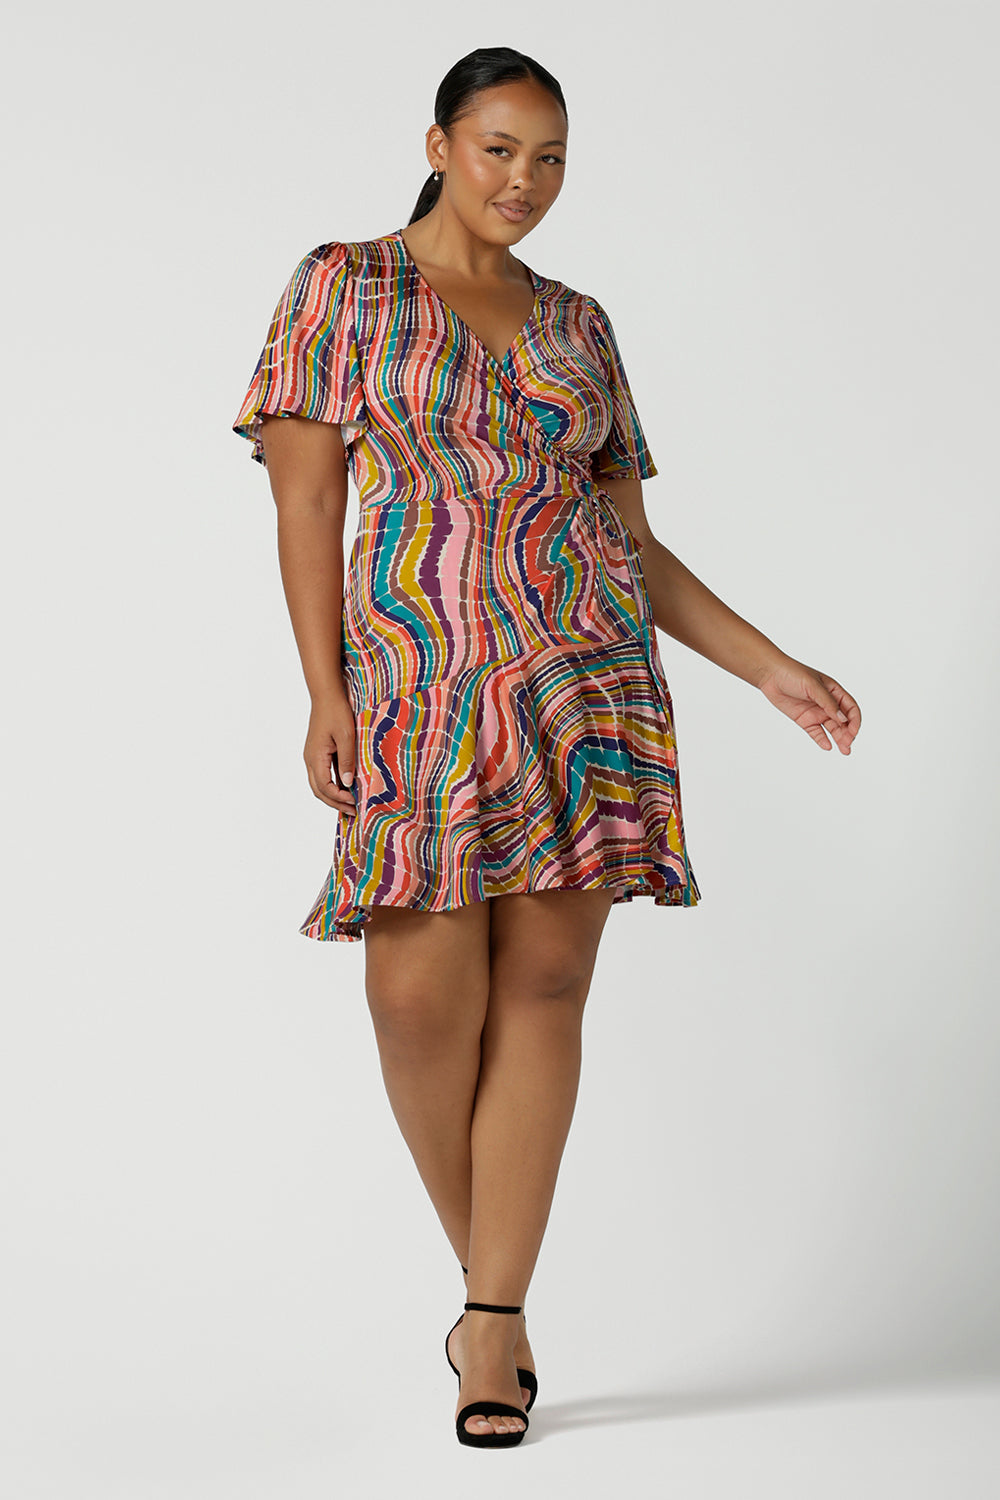 Curvy size 16 woman wears the Julie wrap dress in Kaleidoscope rainbow stripe. With a tier frill hem and flutter sleeves, this dress is flirty and great for the party season. Made in Australia size 8 - 24.